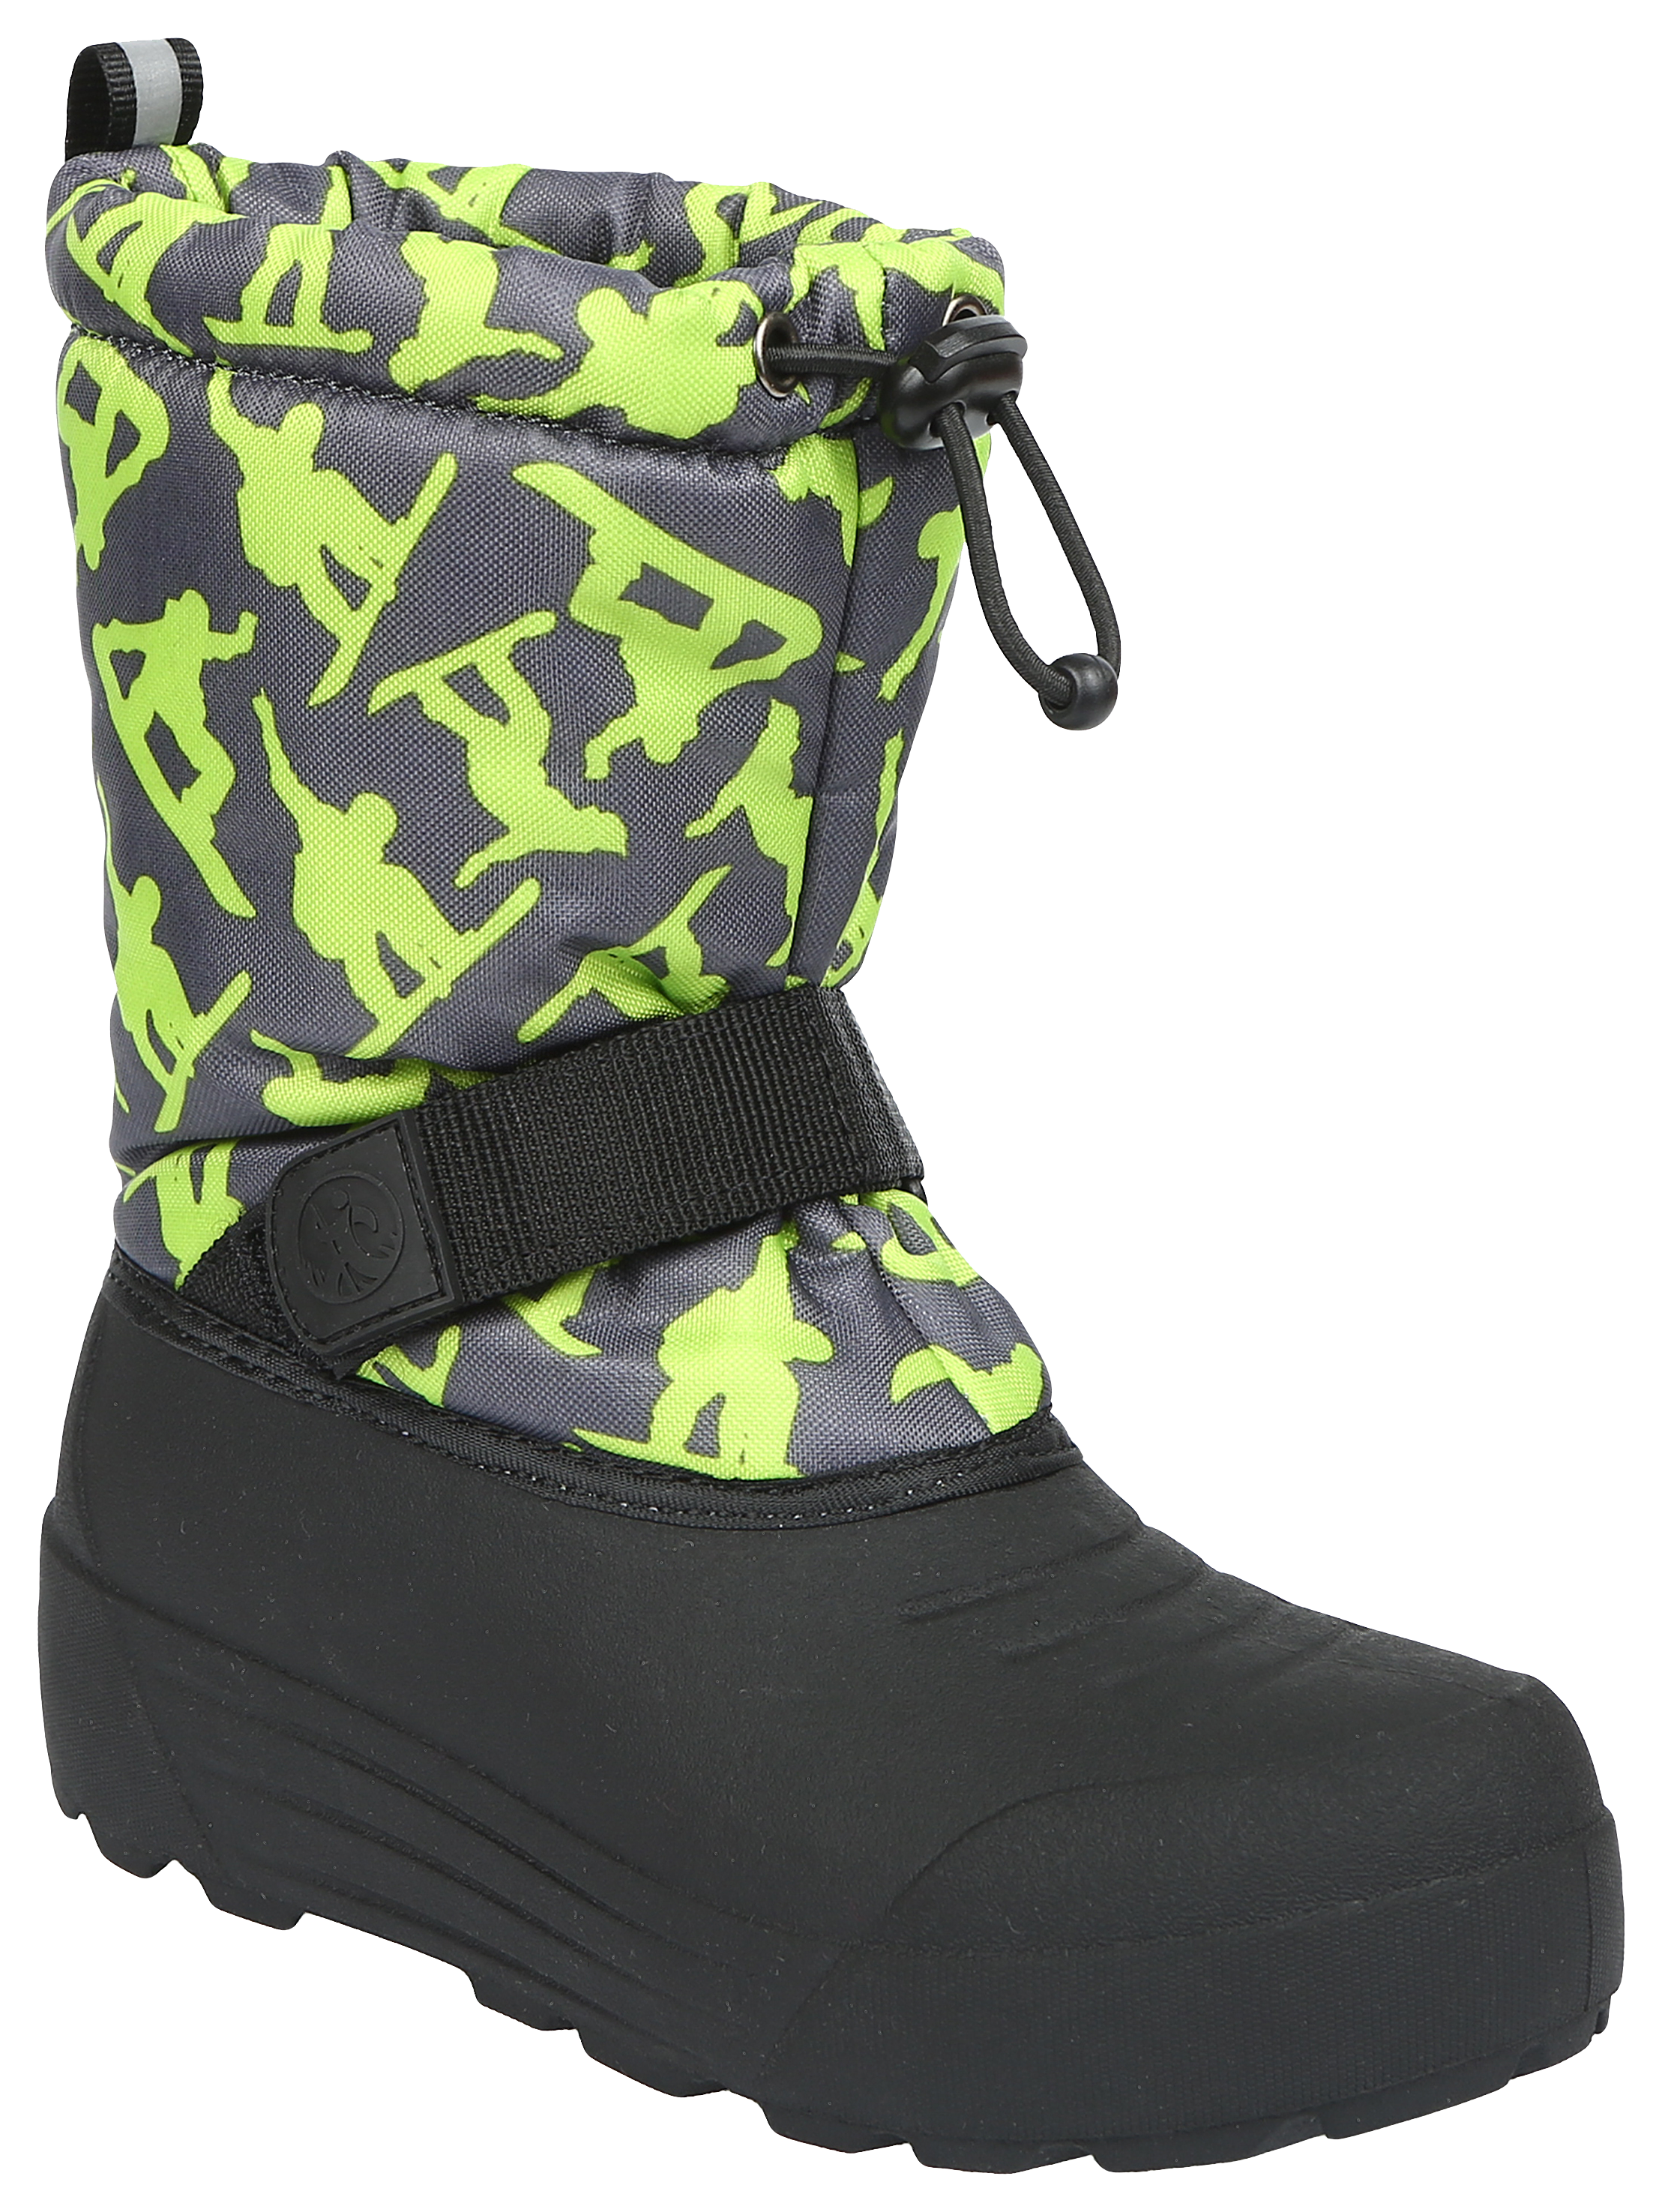 Northside Frosty Insulated Pac Boots for Kids - Dark Gray/Green - 7 Kids